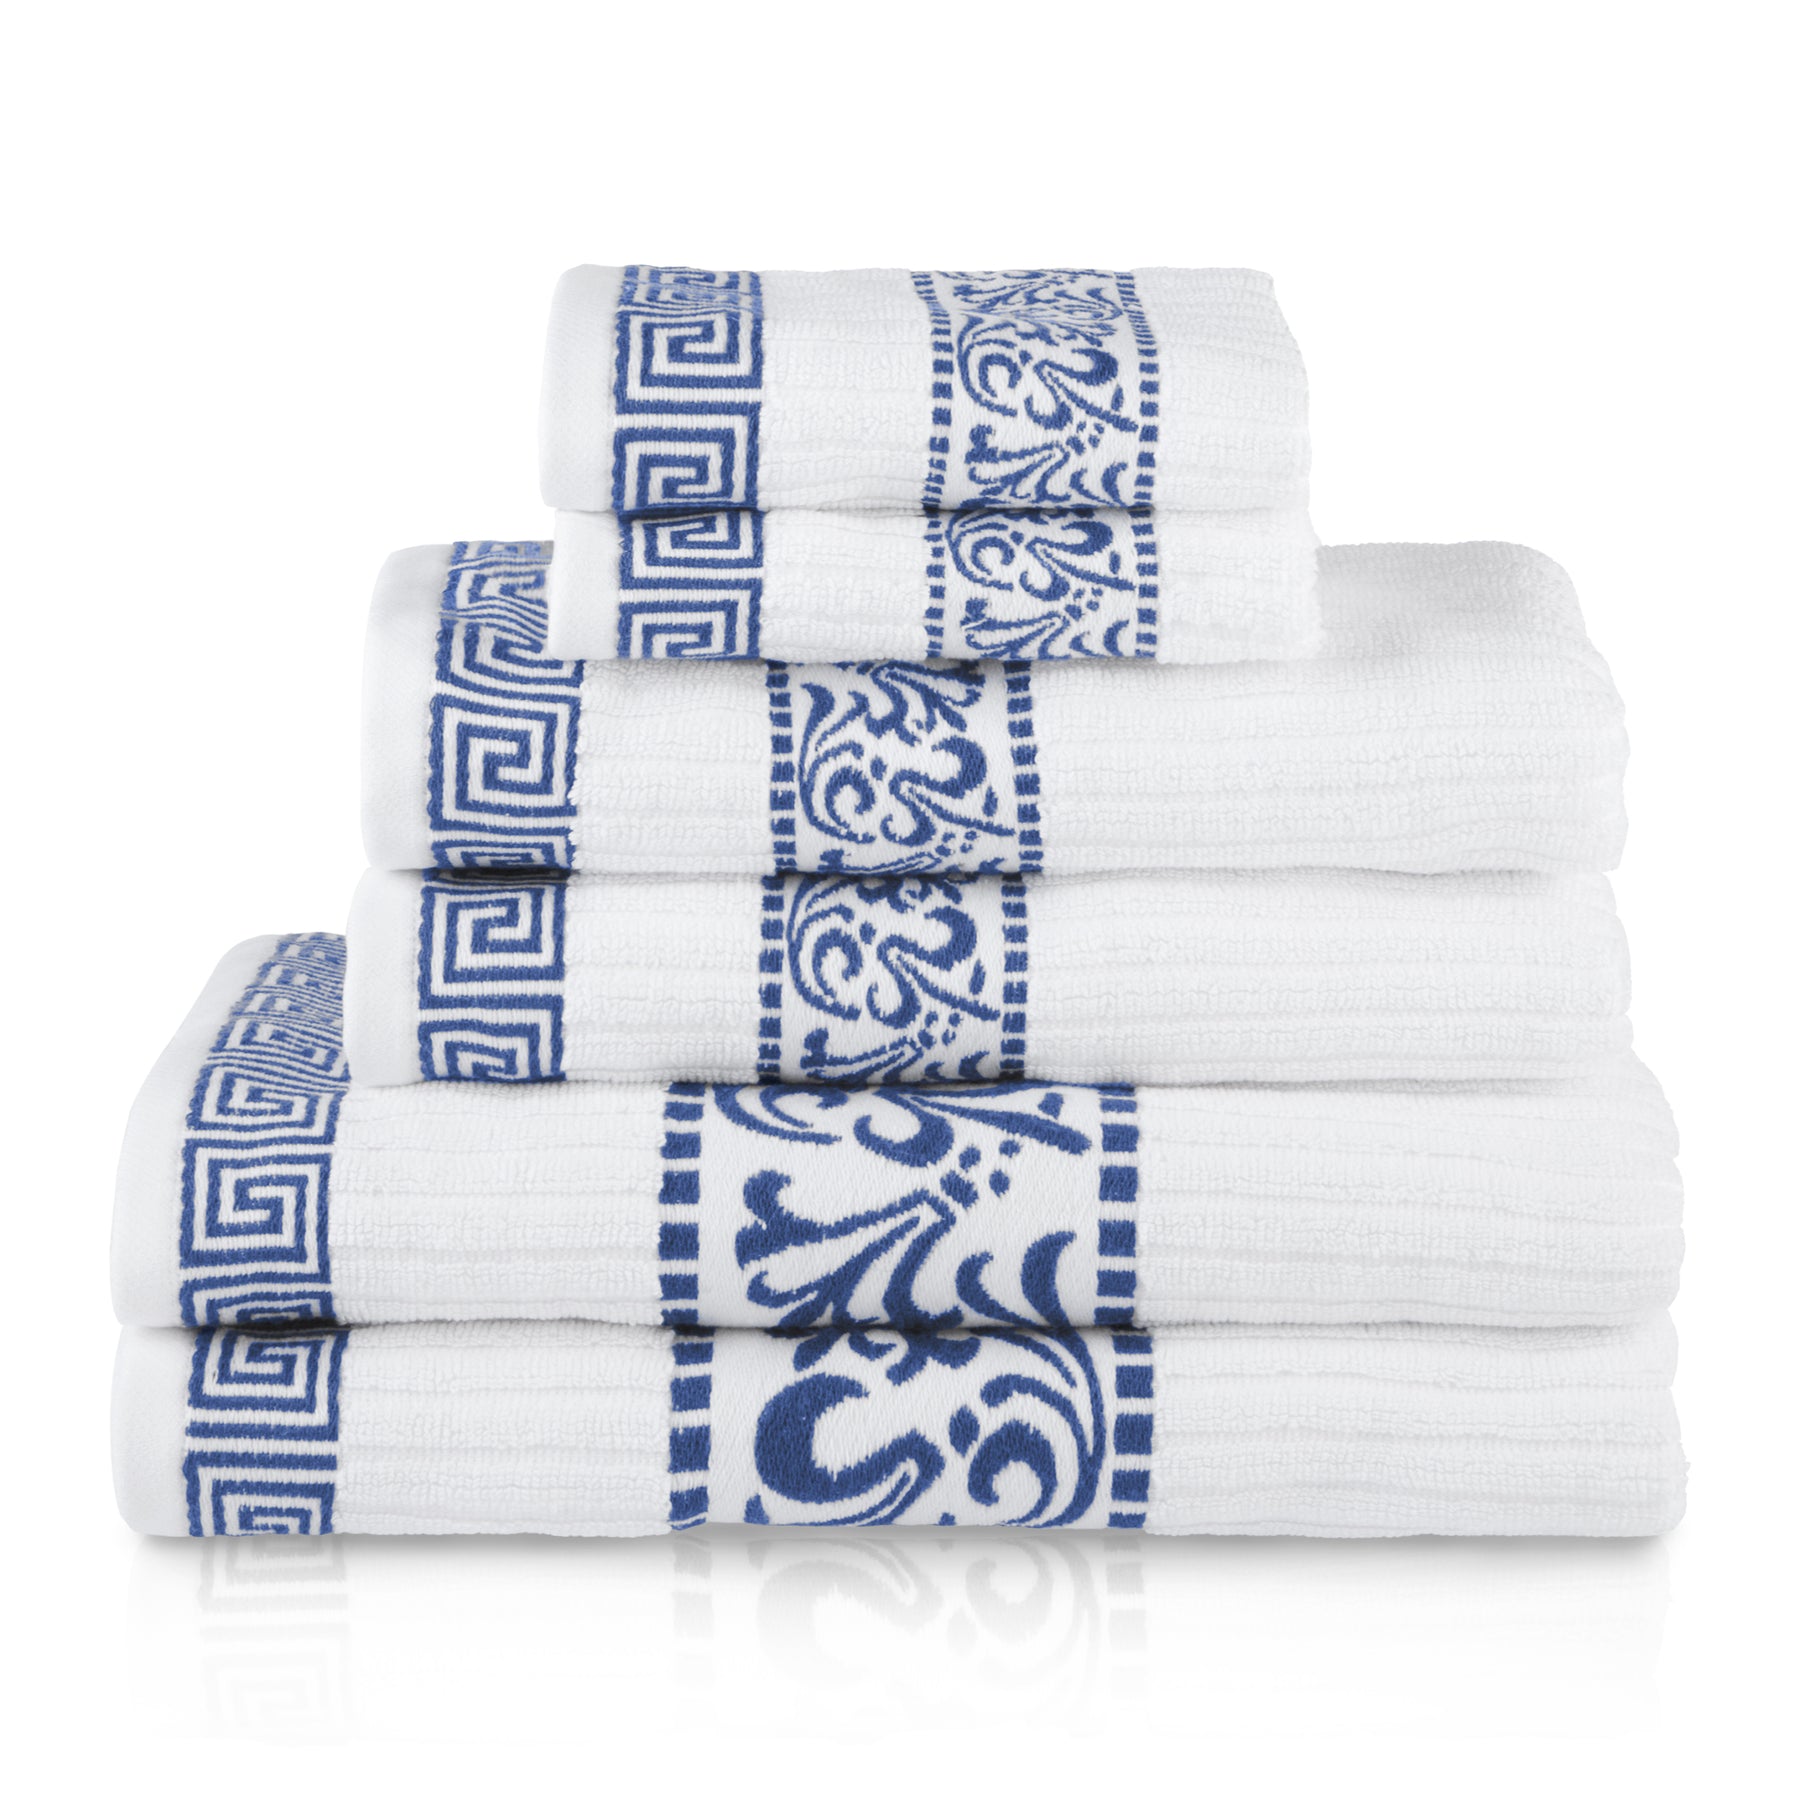 Superior Athens Cotton 6-Piece Assorted Towel Set with Greek Scroll and Floral Pattern - Navy Blue